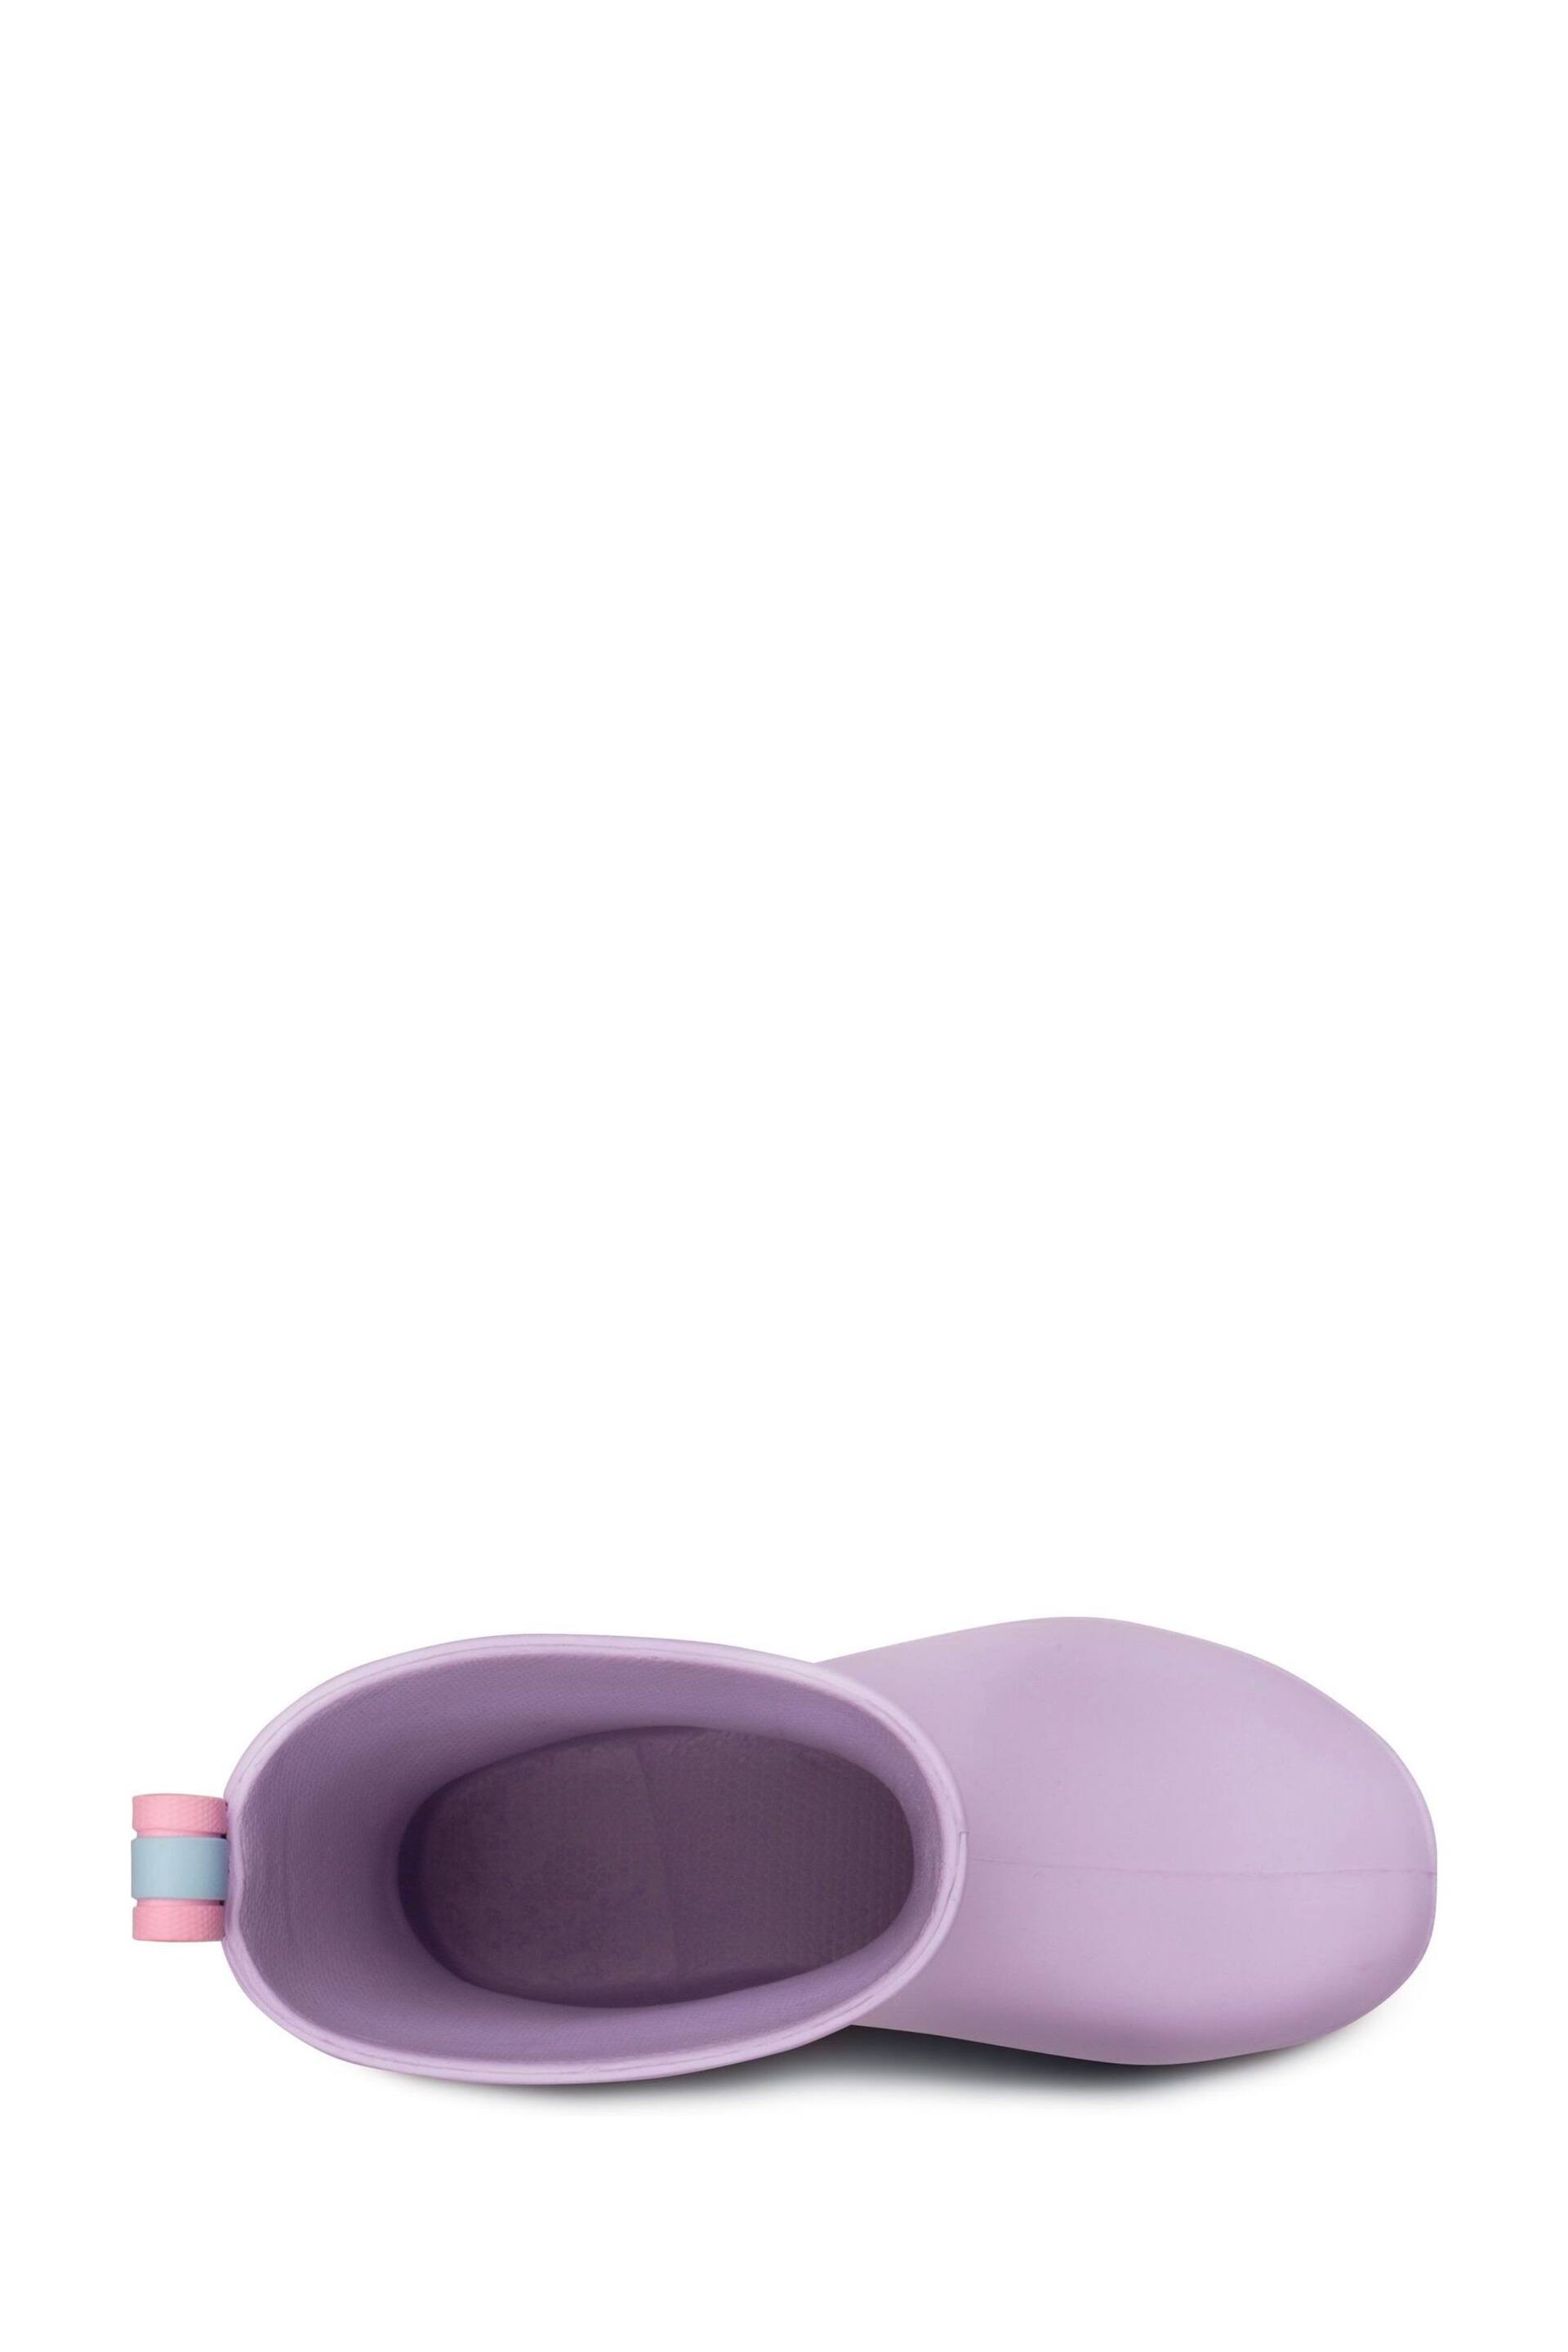 Totes Purple Childrens Charley Welly Boots - Image 5 of 5